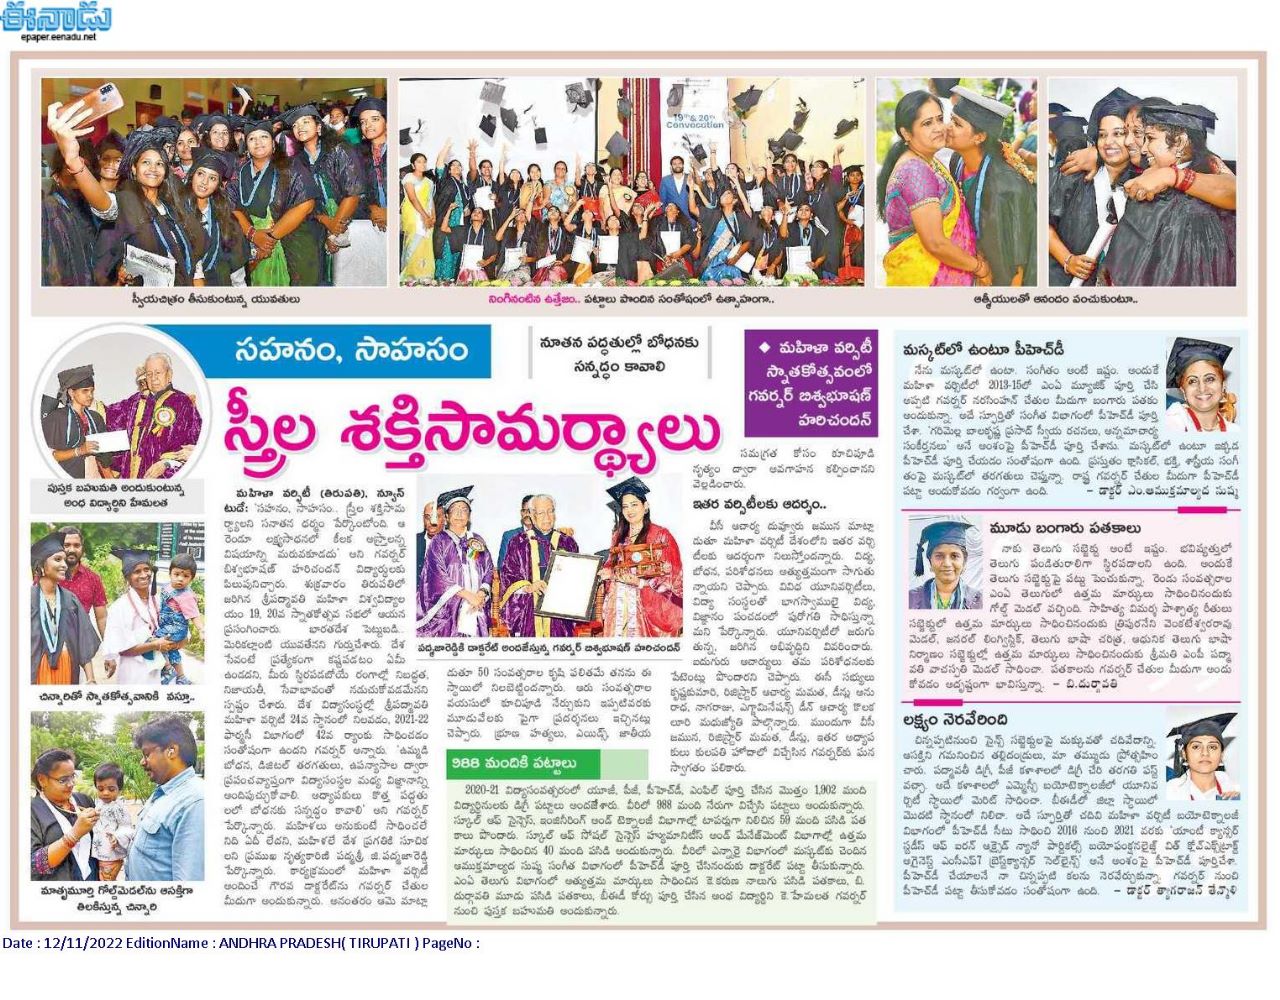 19th & 20th Convocation Held on 11-11-2022